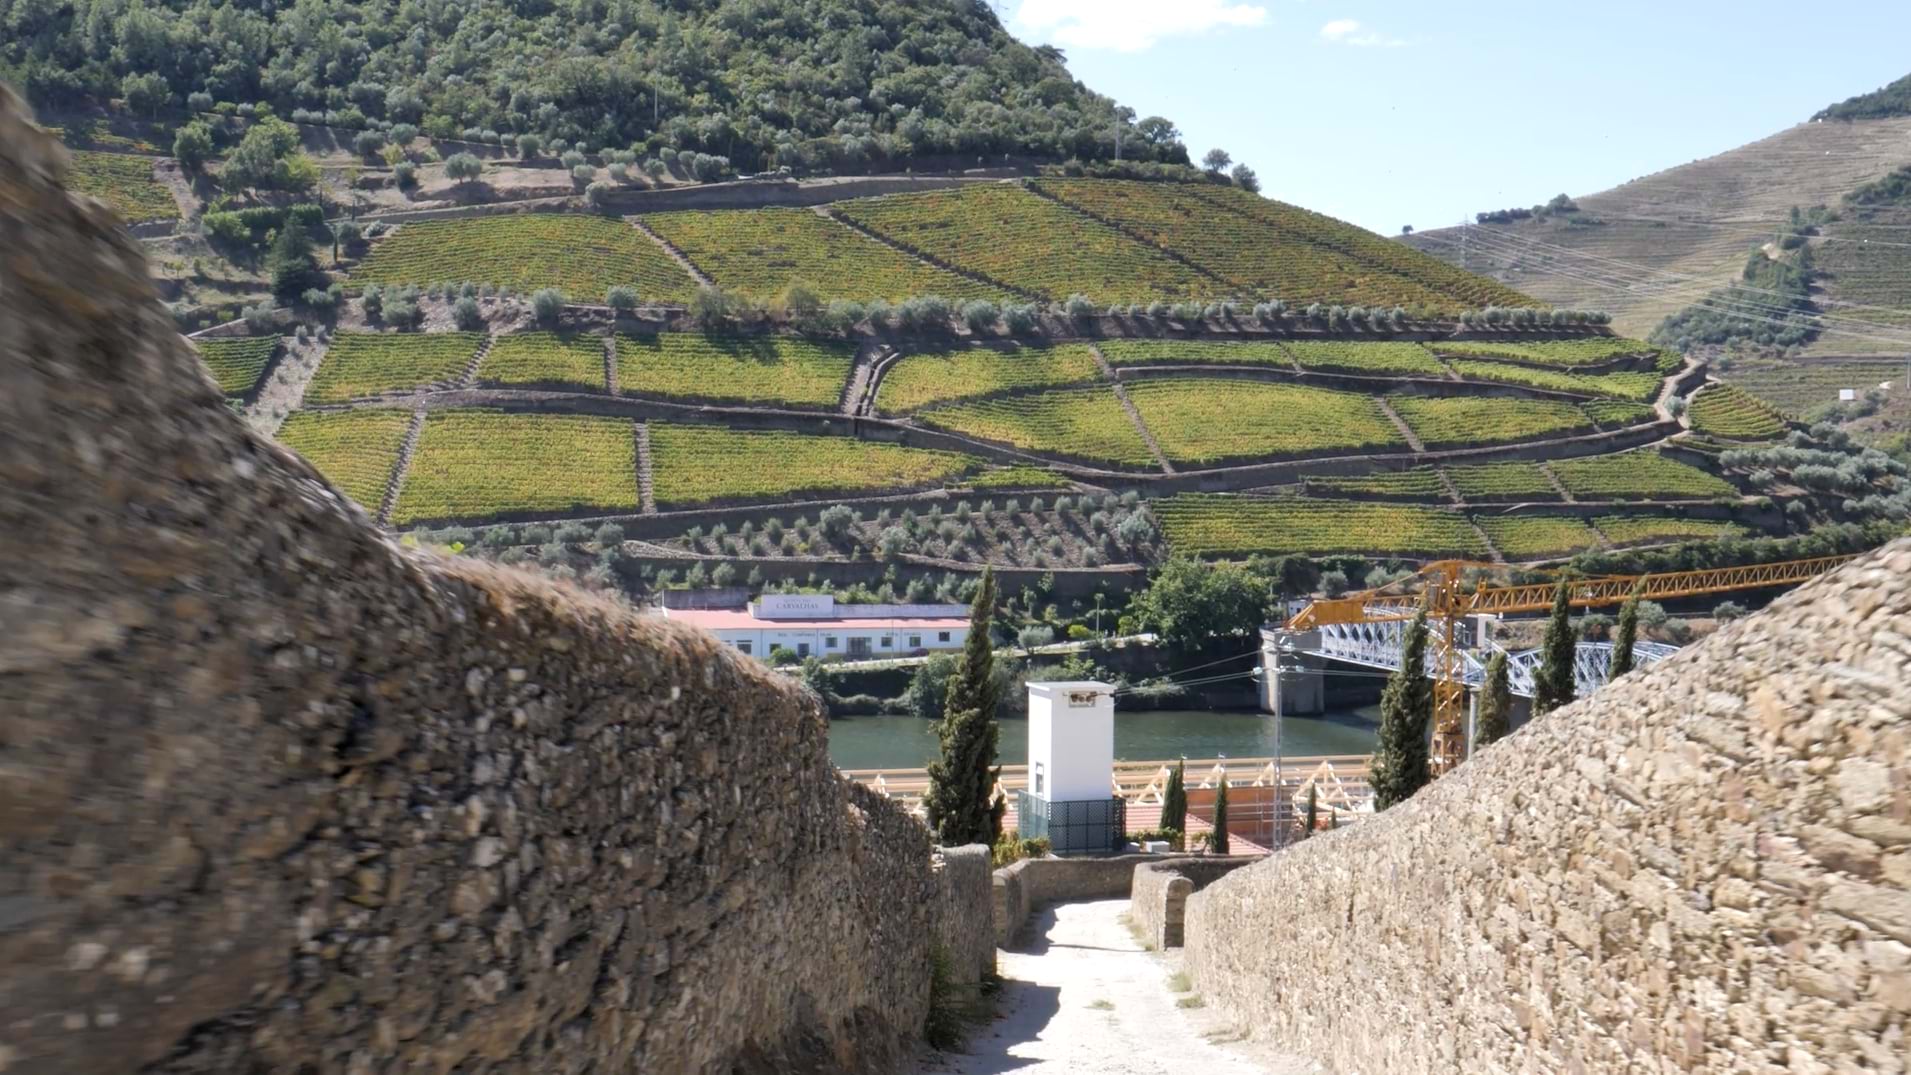 A winery with steep hills and a cobblestone walls